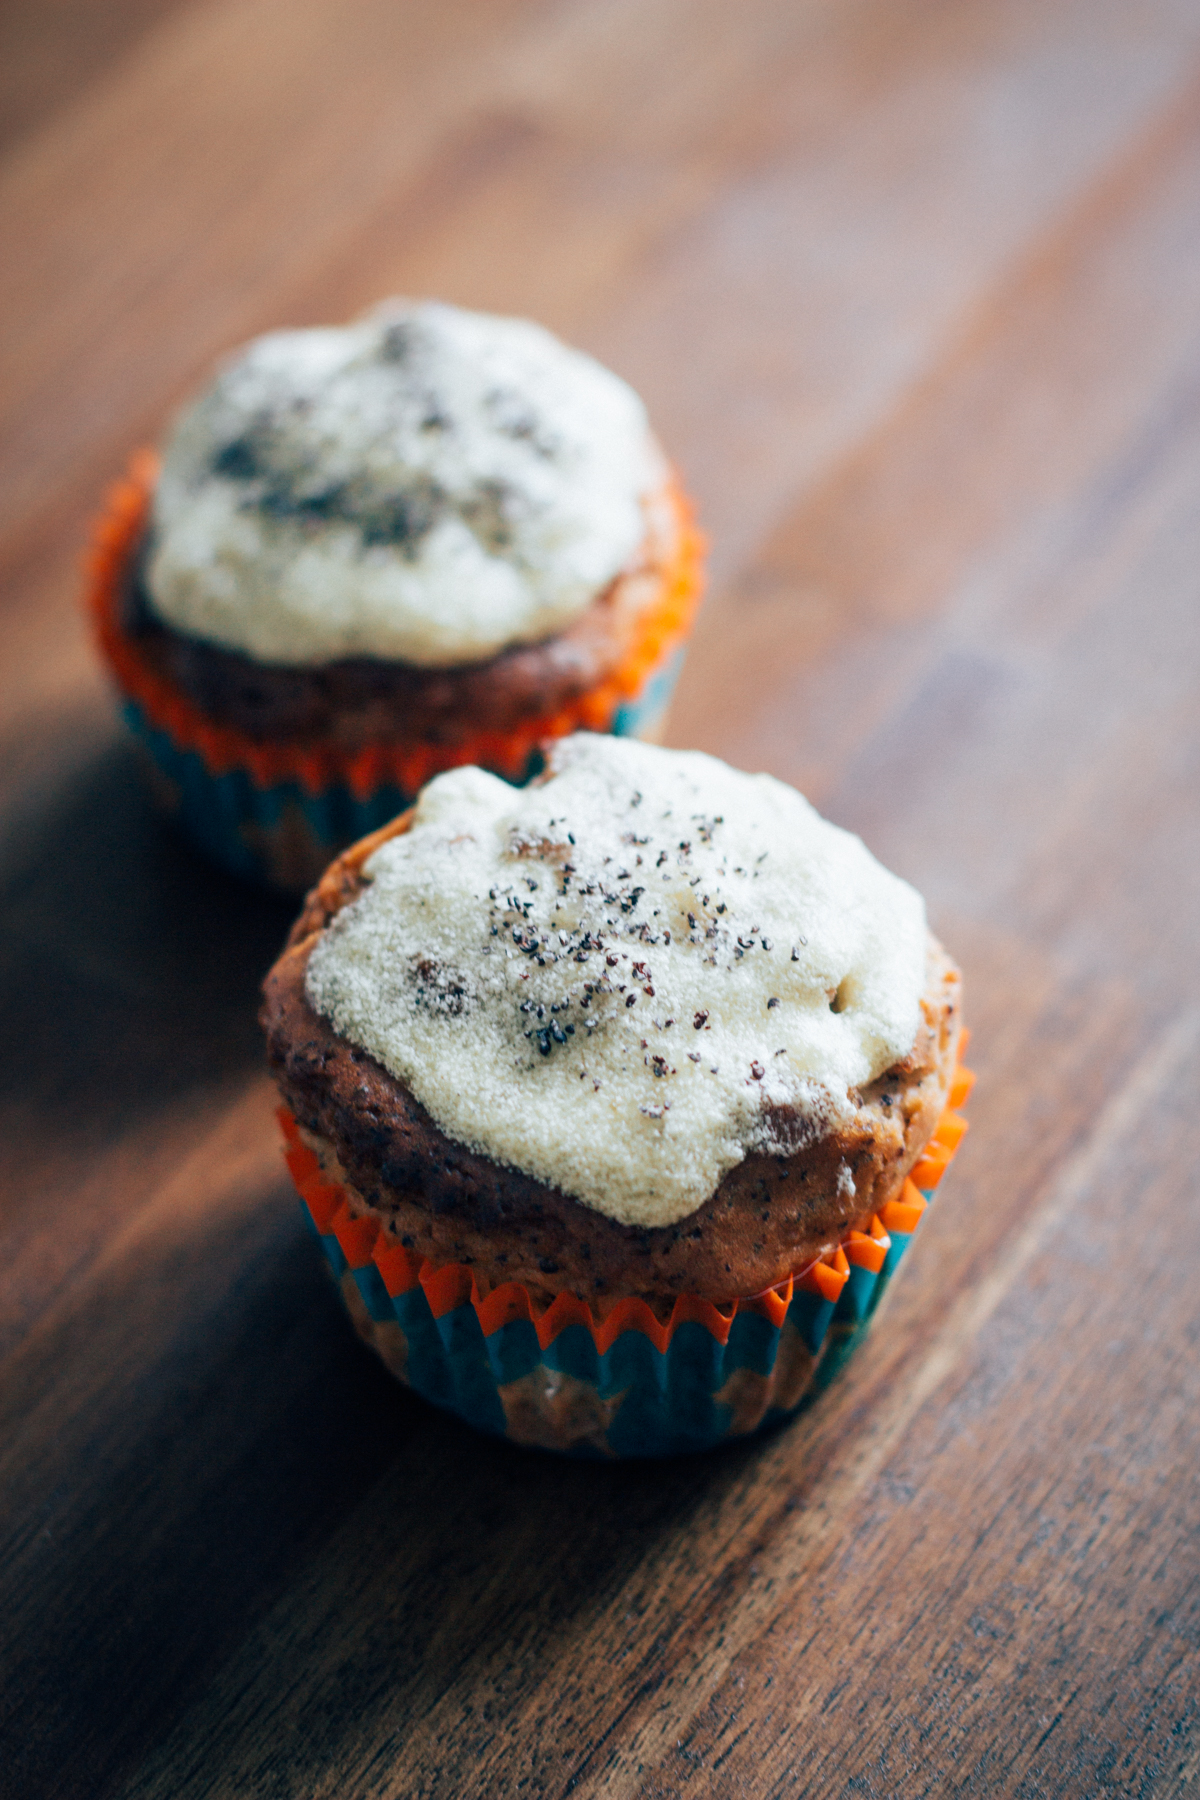 Zitronen-Mohn-Muffins – Can I have it?